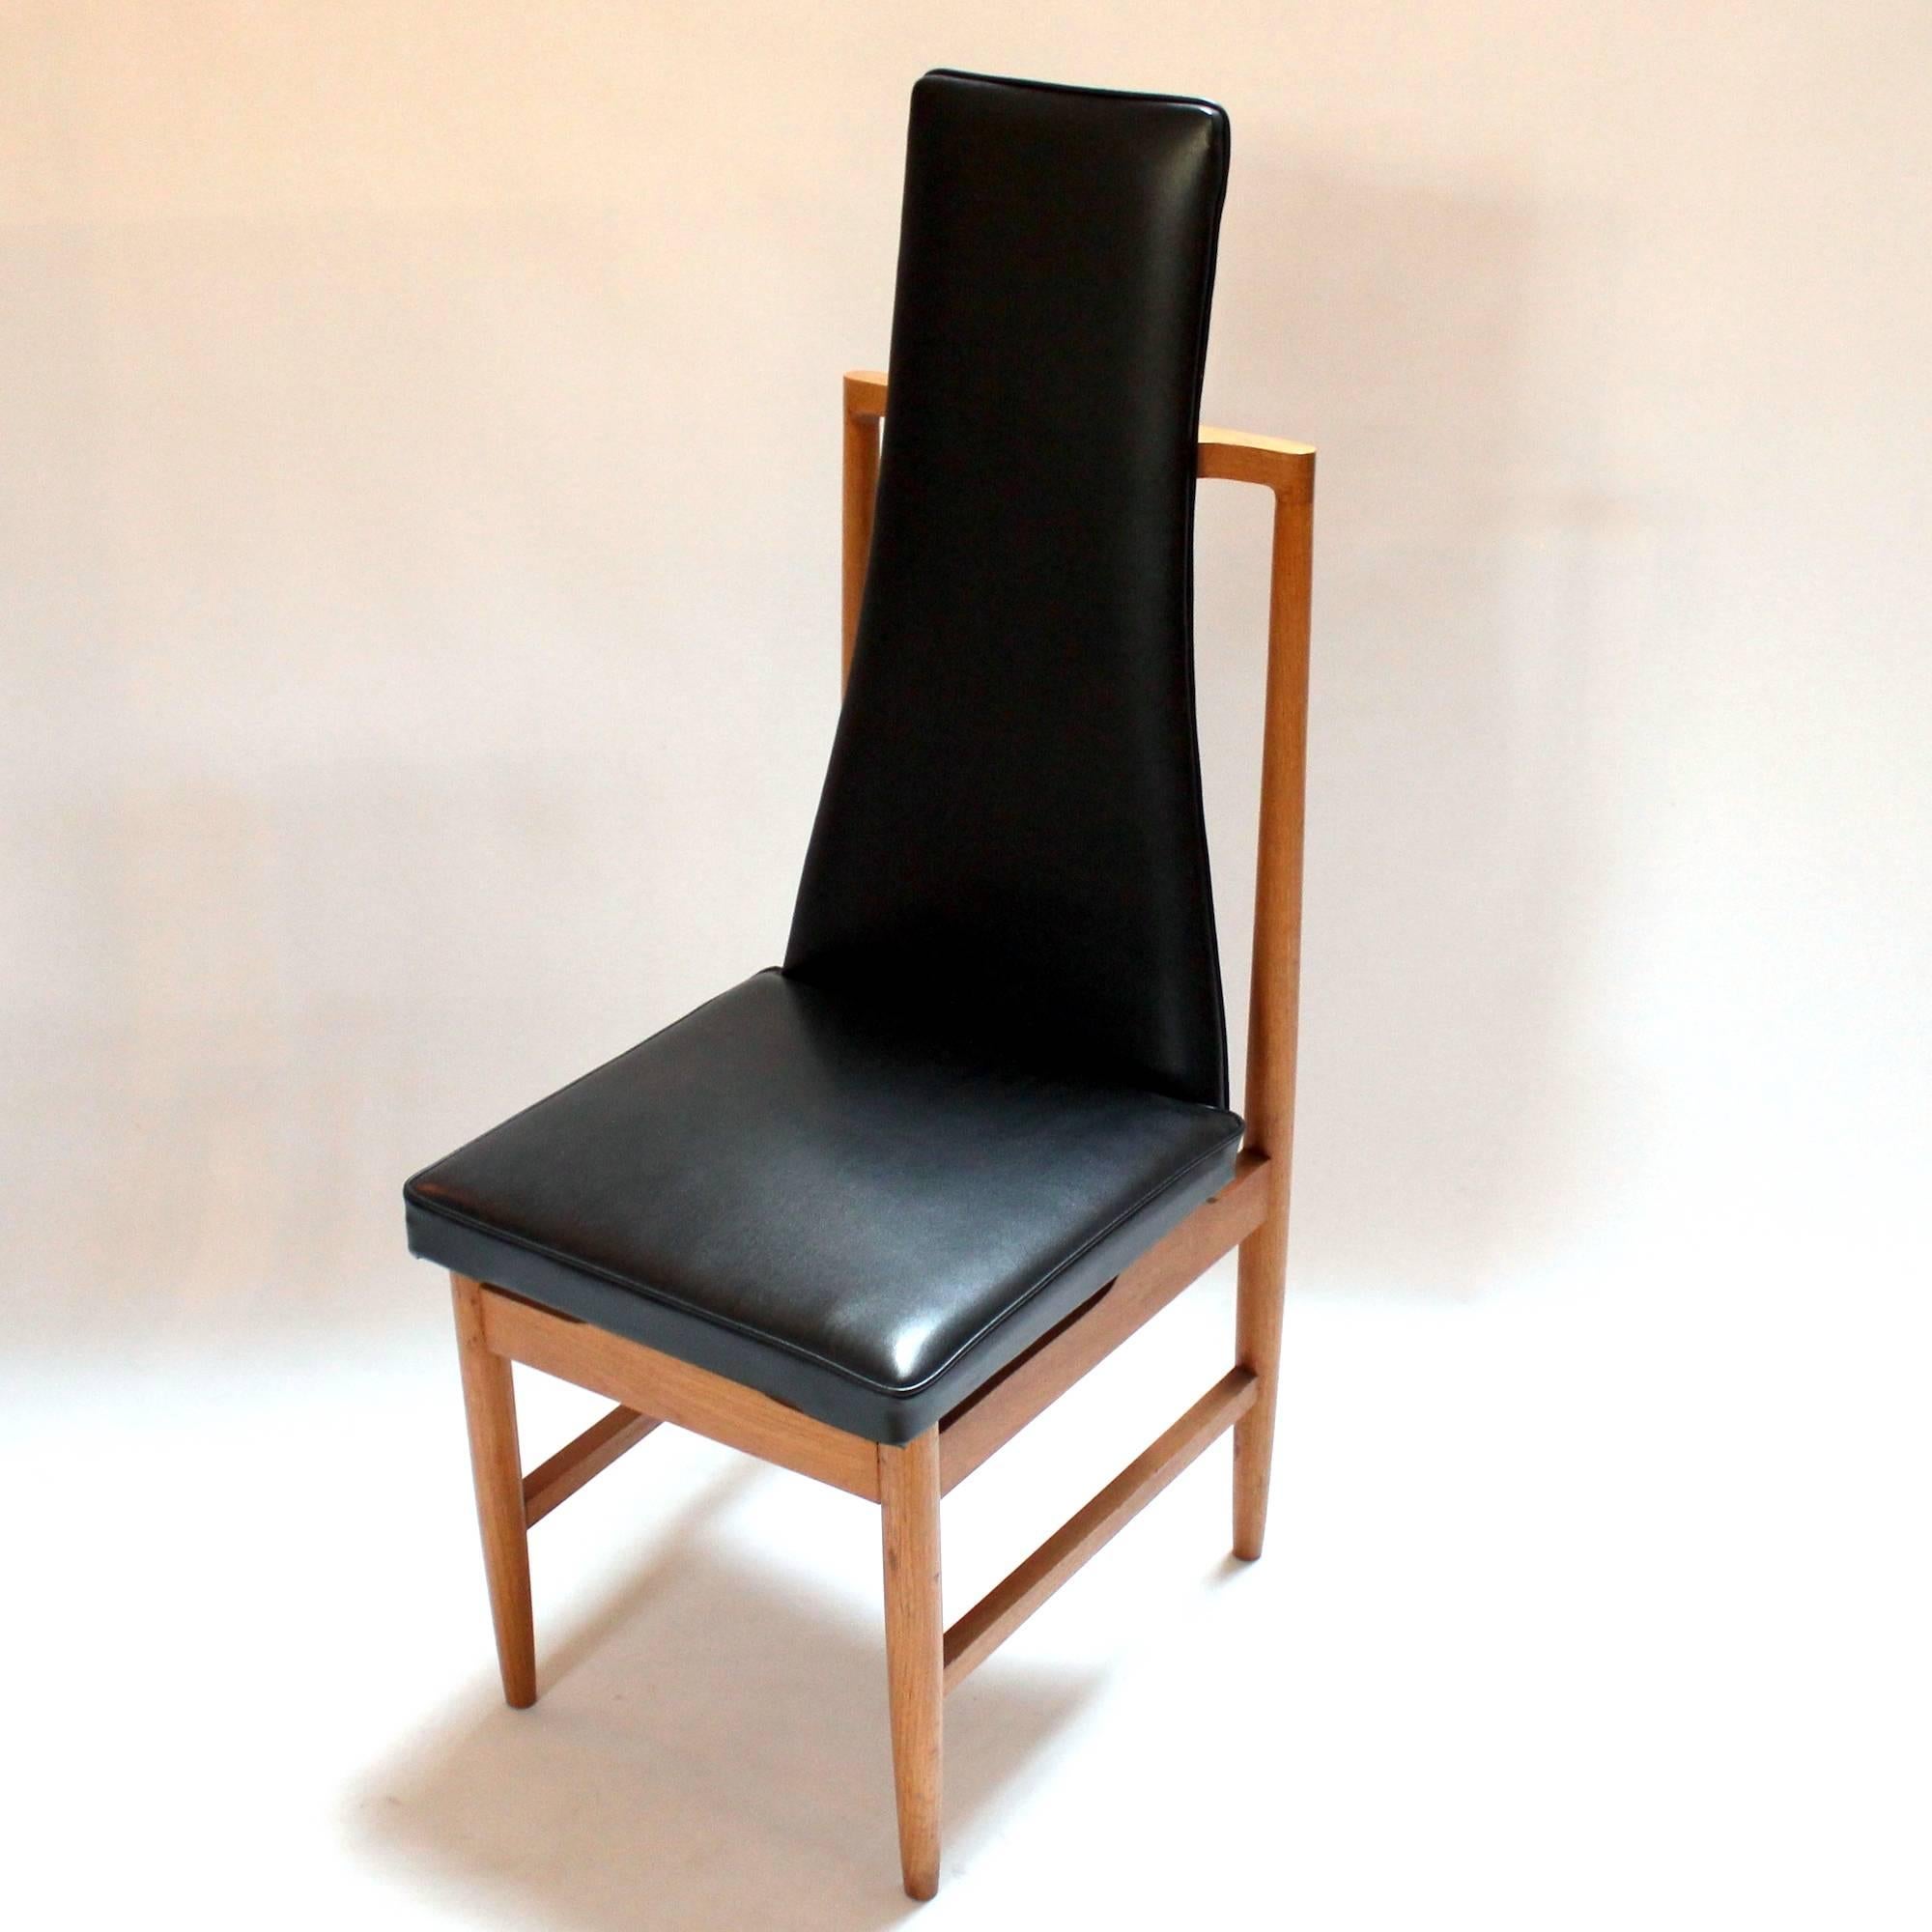 Set of four 1960s Danish Modern teak and vinyl tall-back dining chairs. Unusual space-age design, in excellent condition. Price is for the set.